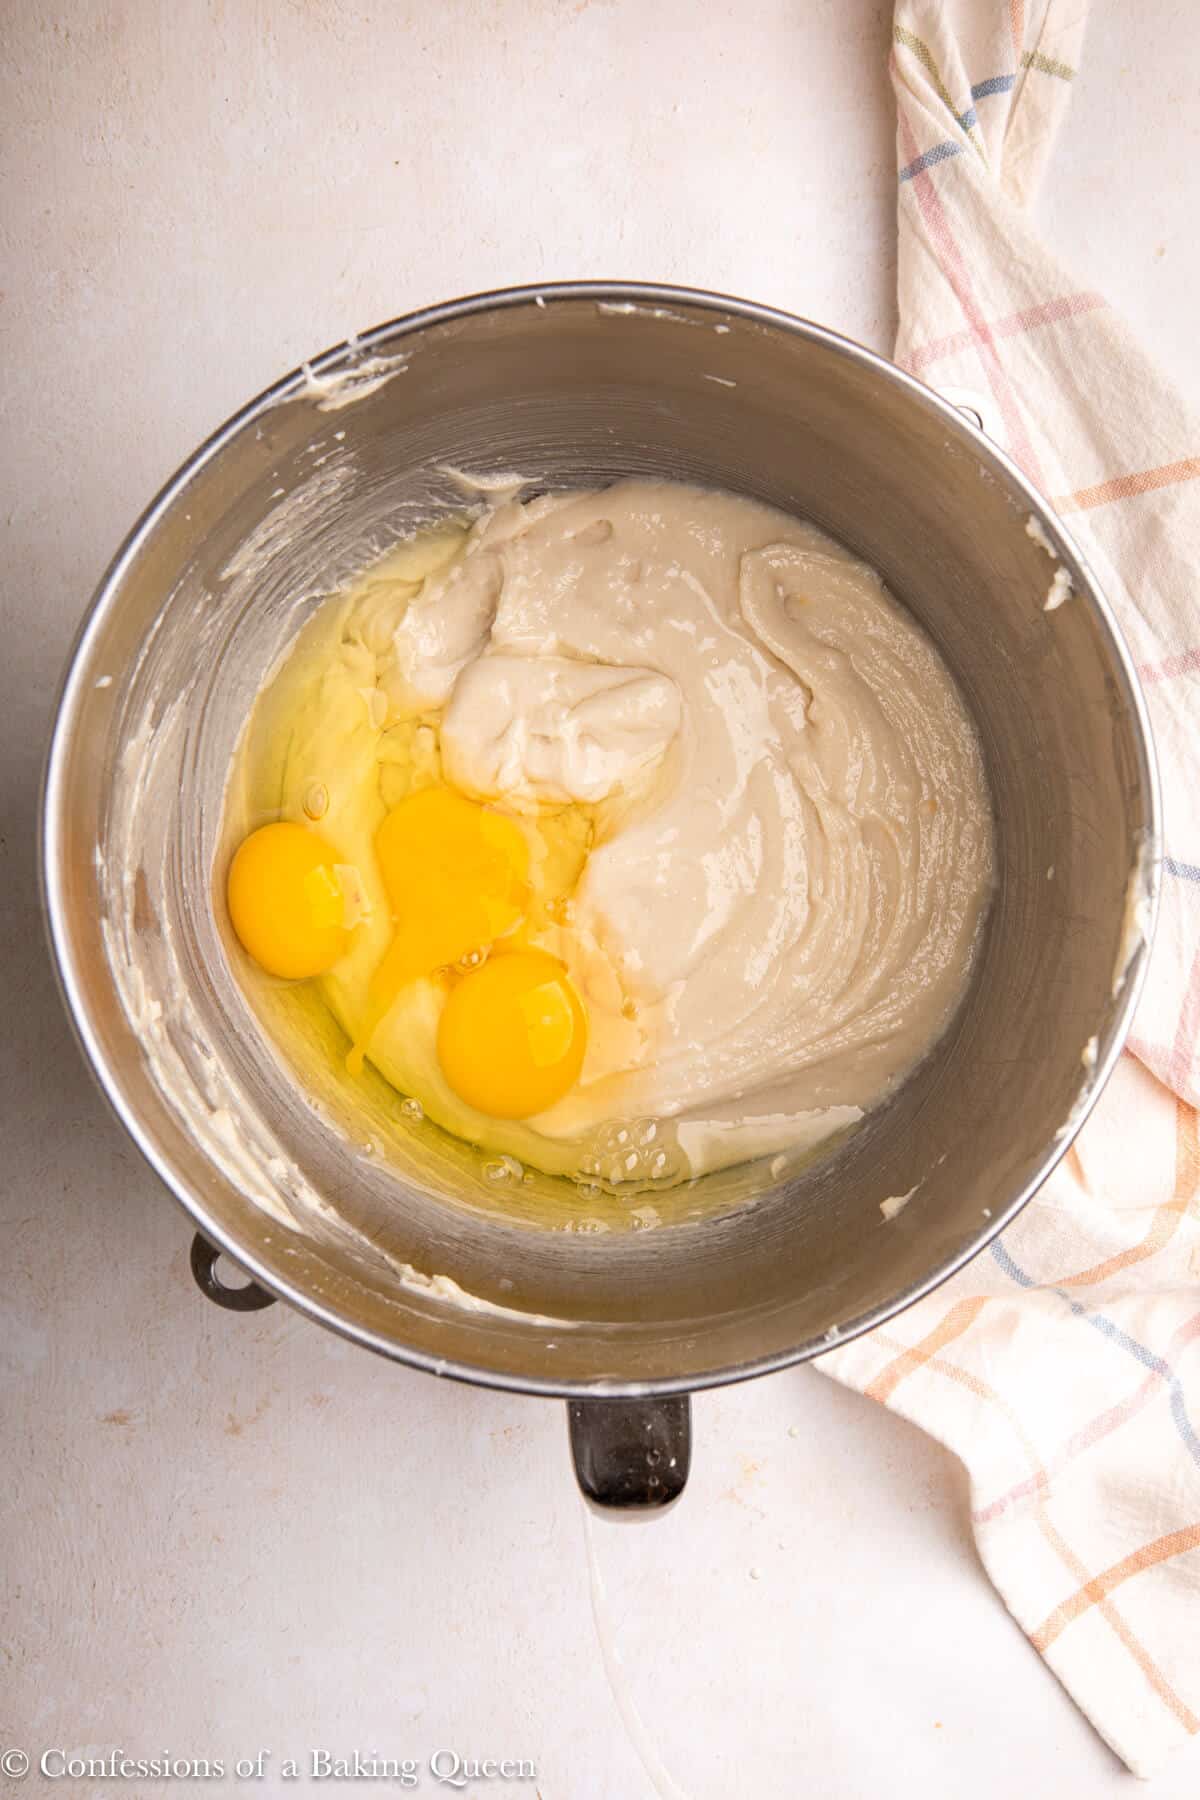 eggs added to cake batter in a metal bowl on a light surface with a checkered towel